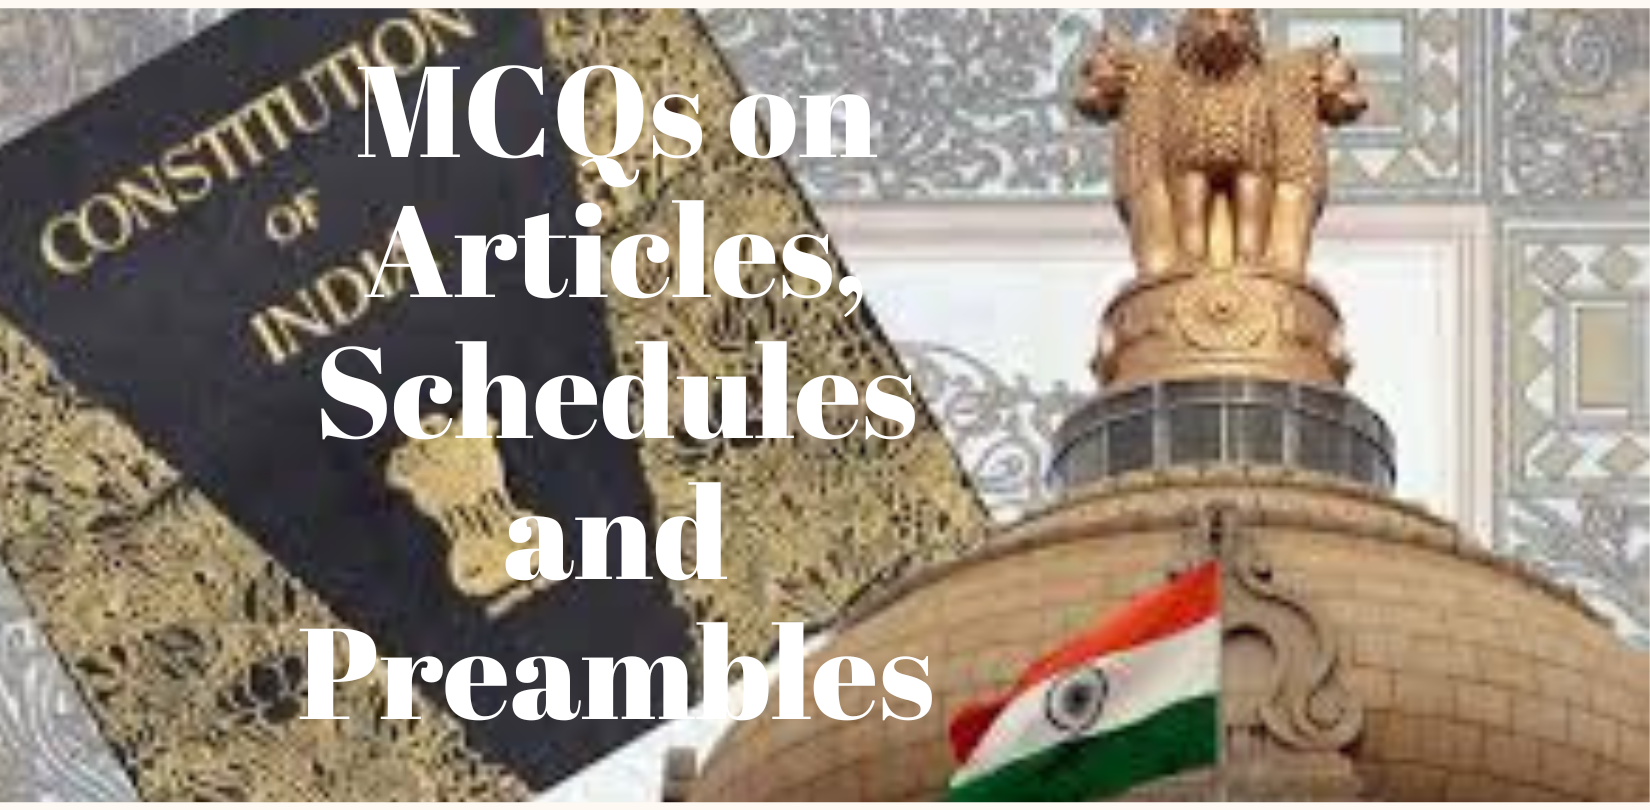 MCQs on Articles, Schedules and Preambles